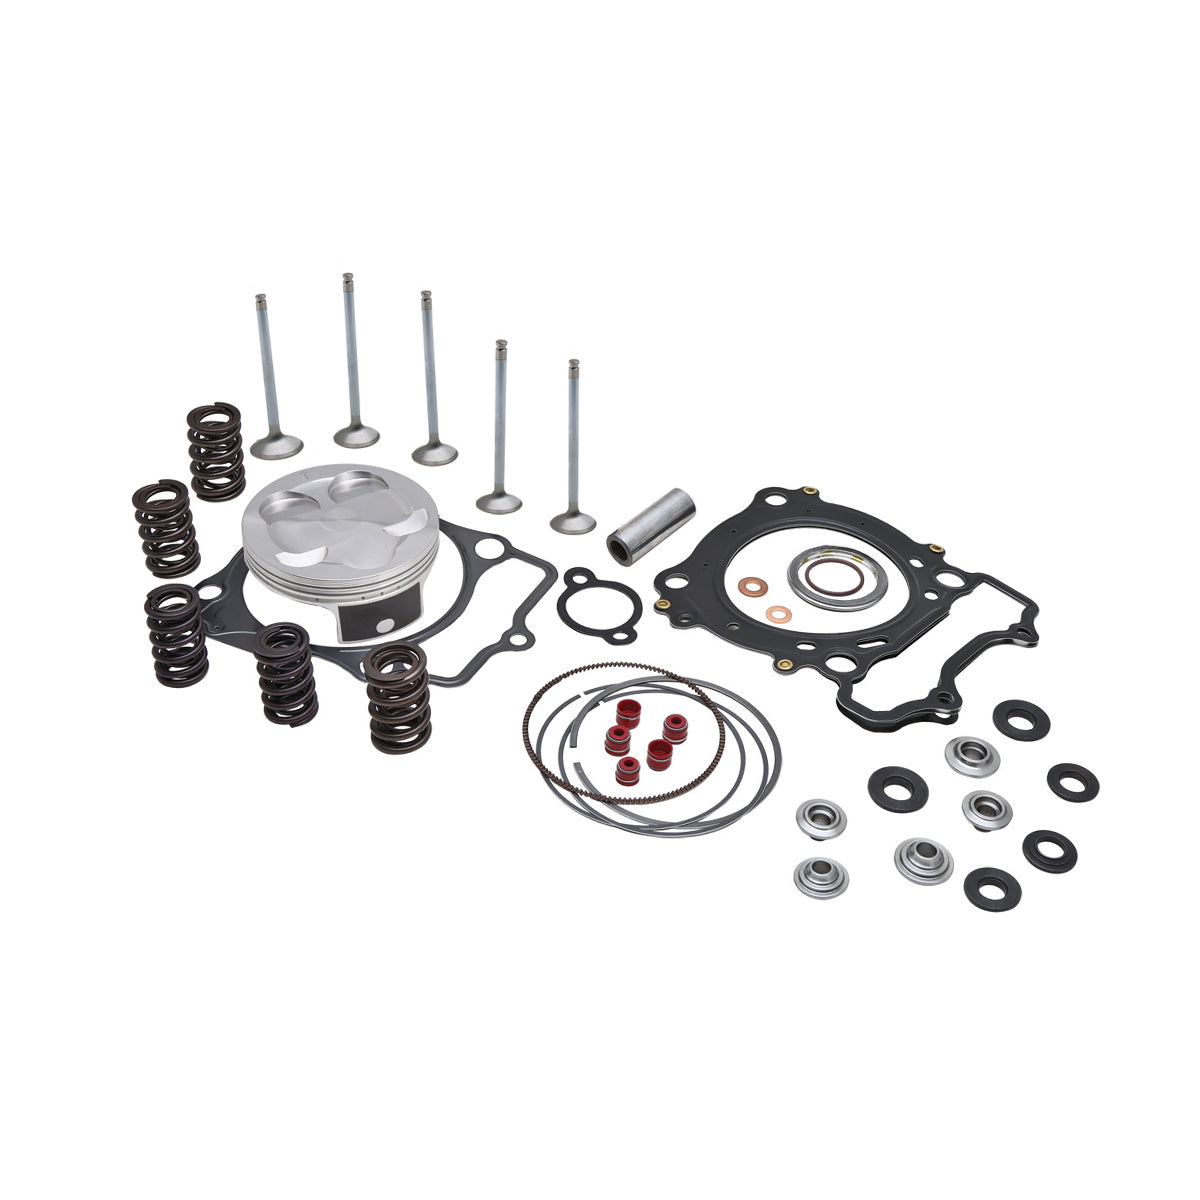 Top End Service Kit, Stainless Conv., 0.380" Lift, Yamaha®, YZ™ 450F, 2006-'09 / WR™ 450, 2007-'15